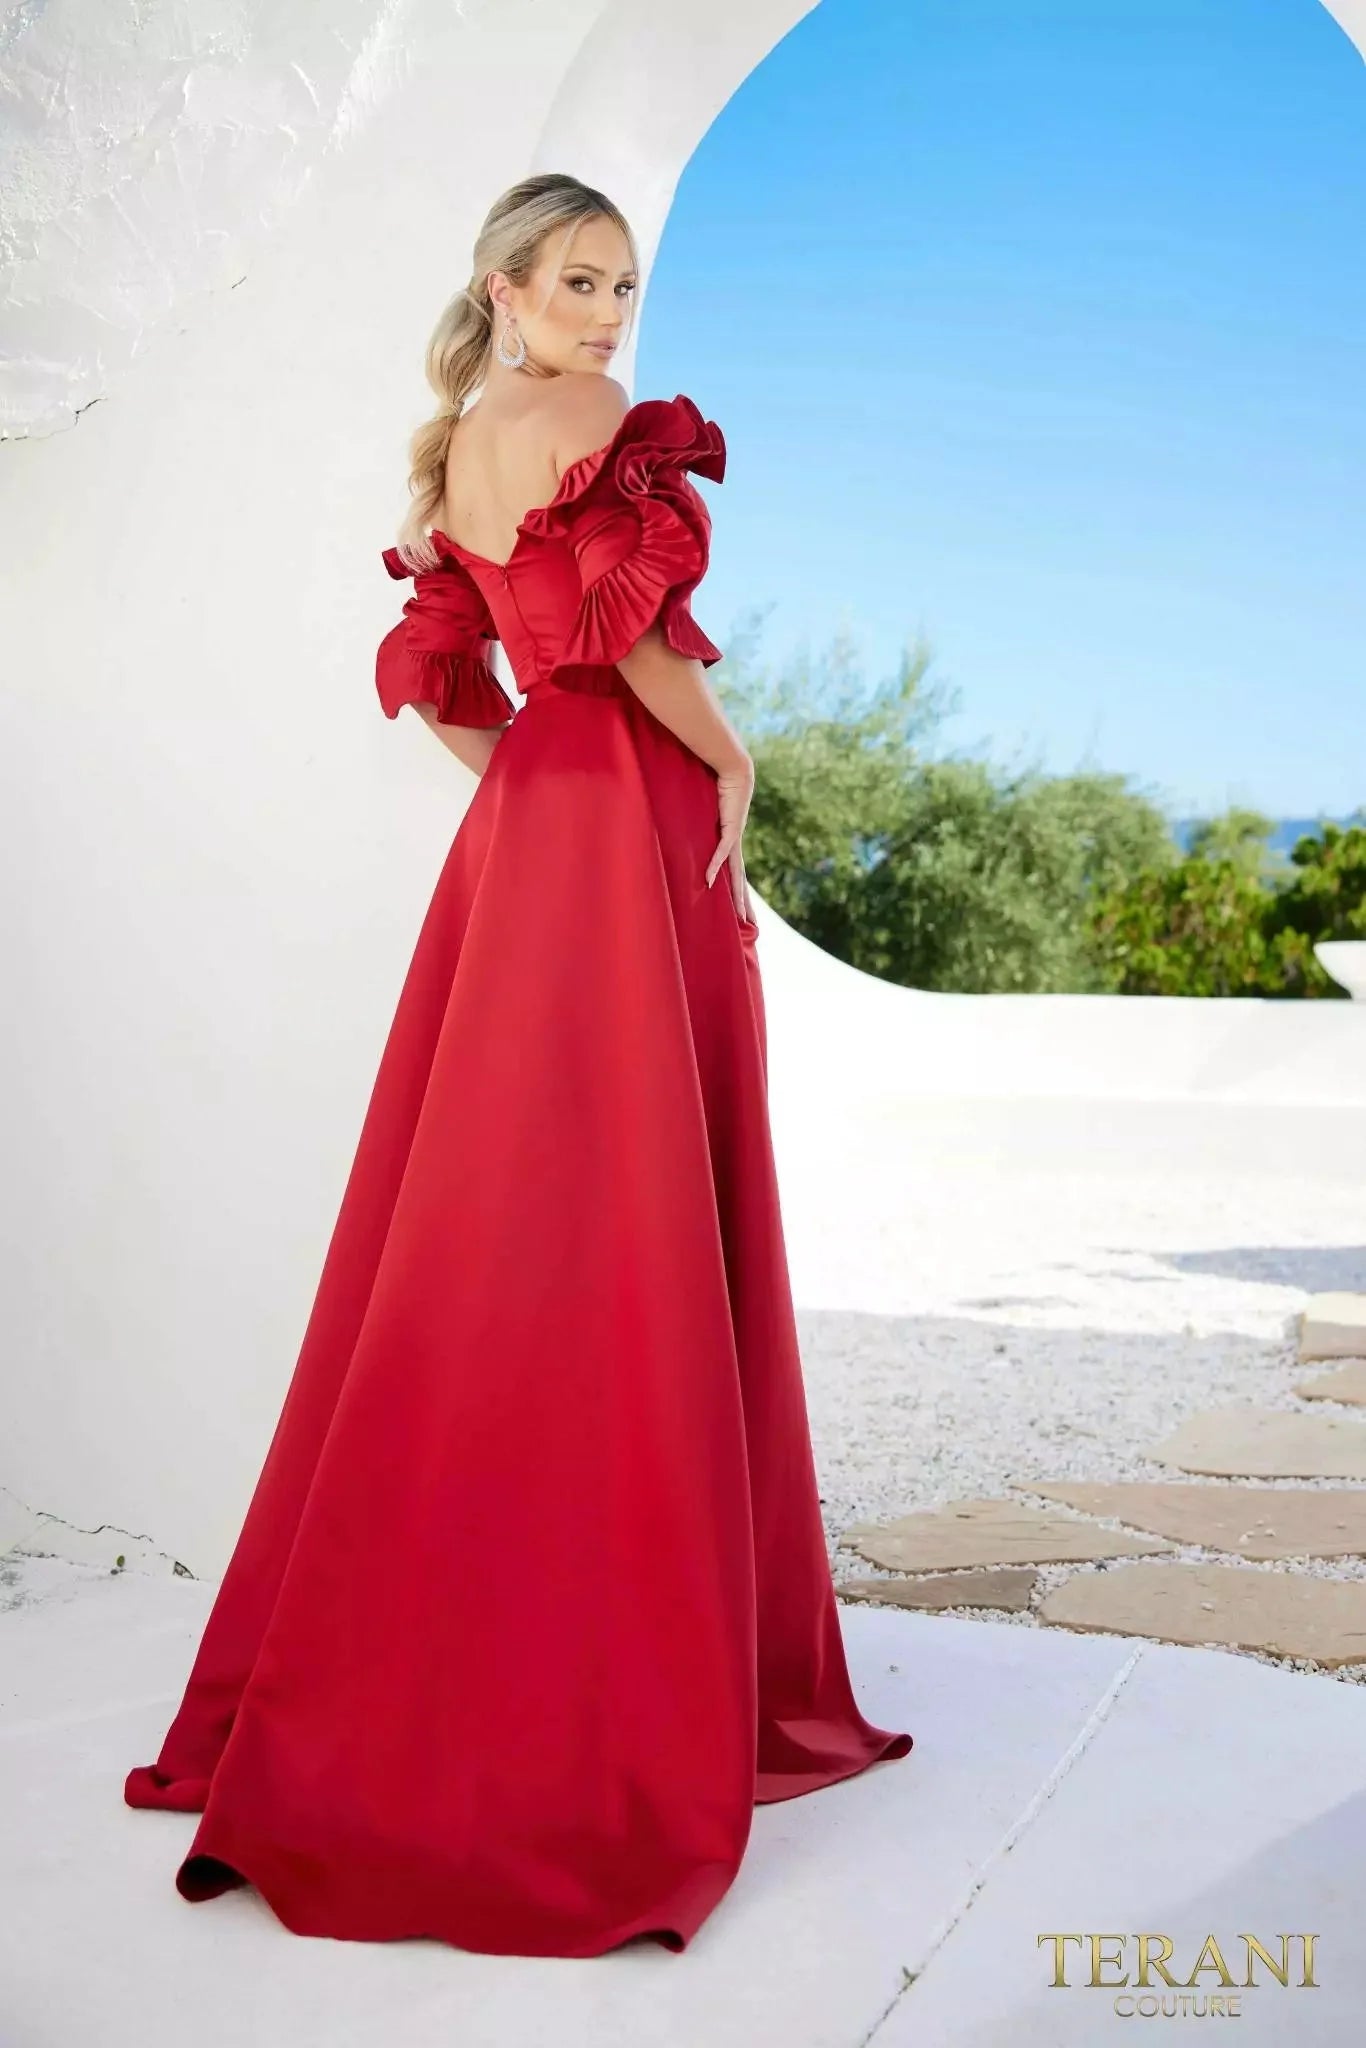 Terani Couture 232M1510 - Satin Ruffle Sleeves Evening Dress Special Occasion Dress